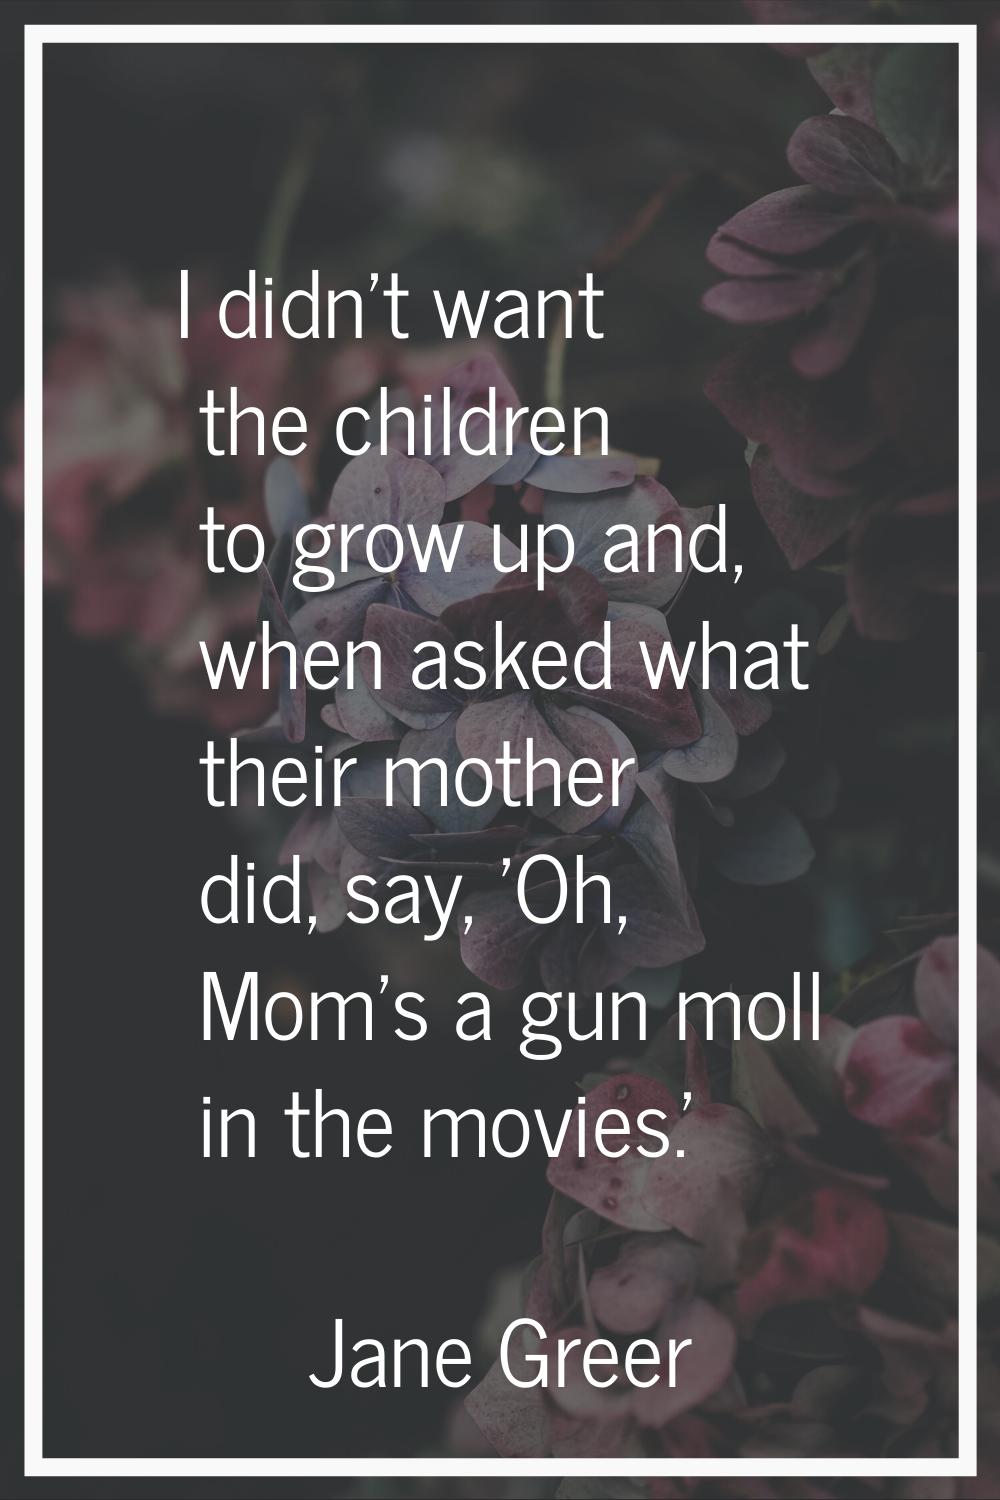 I didn't want the children to grow up and, when asked what their mother did, say, 'Oh, Mom's a gun 